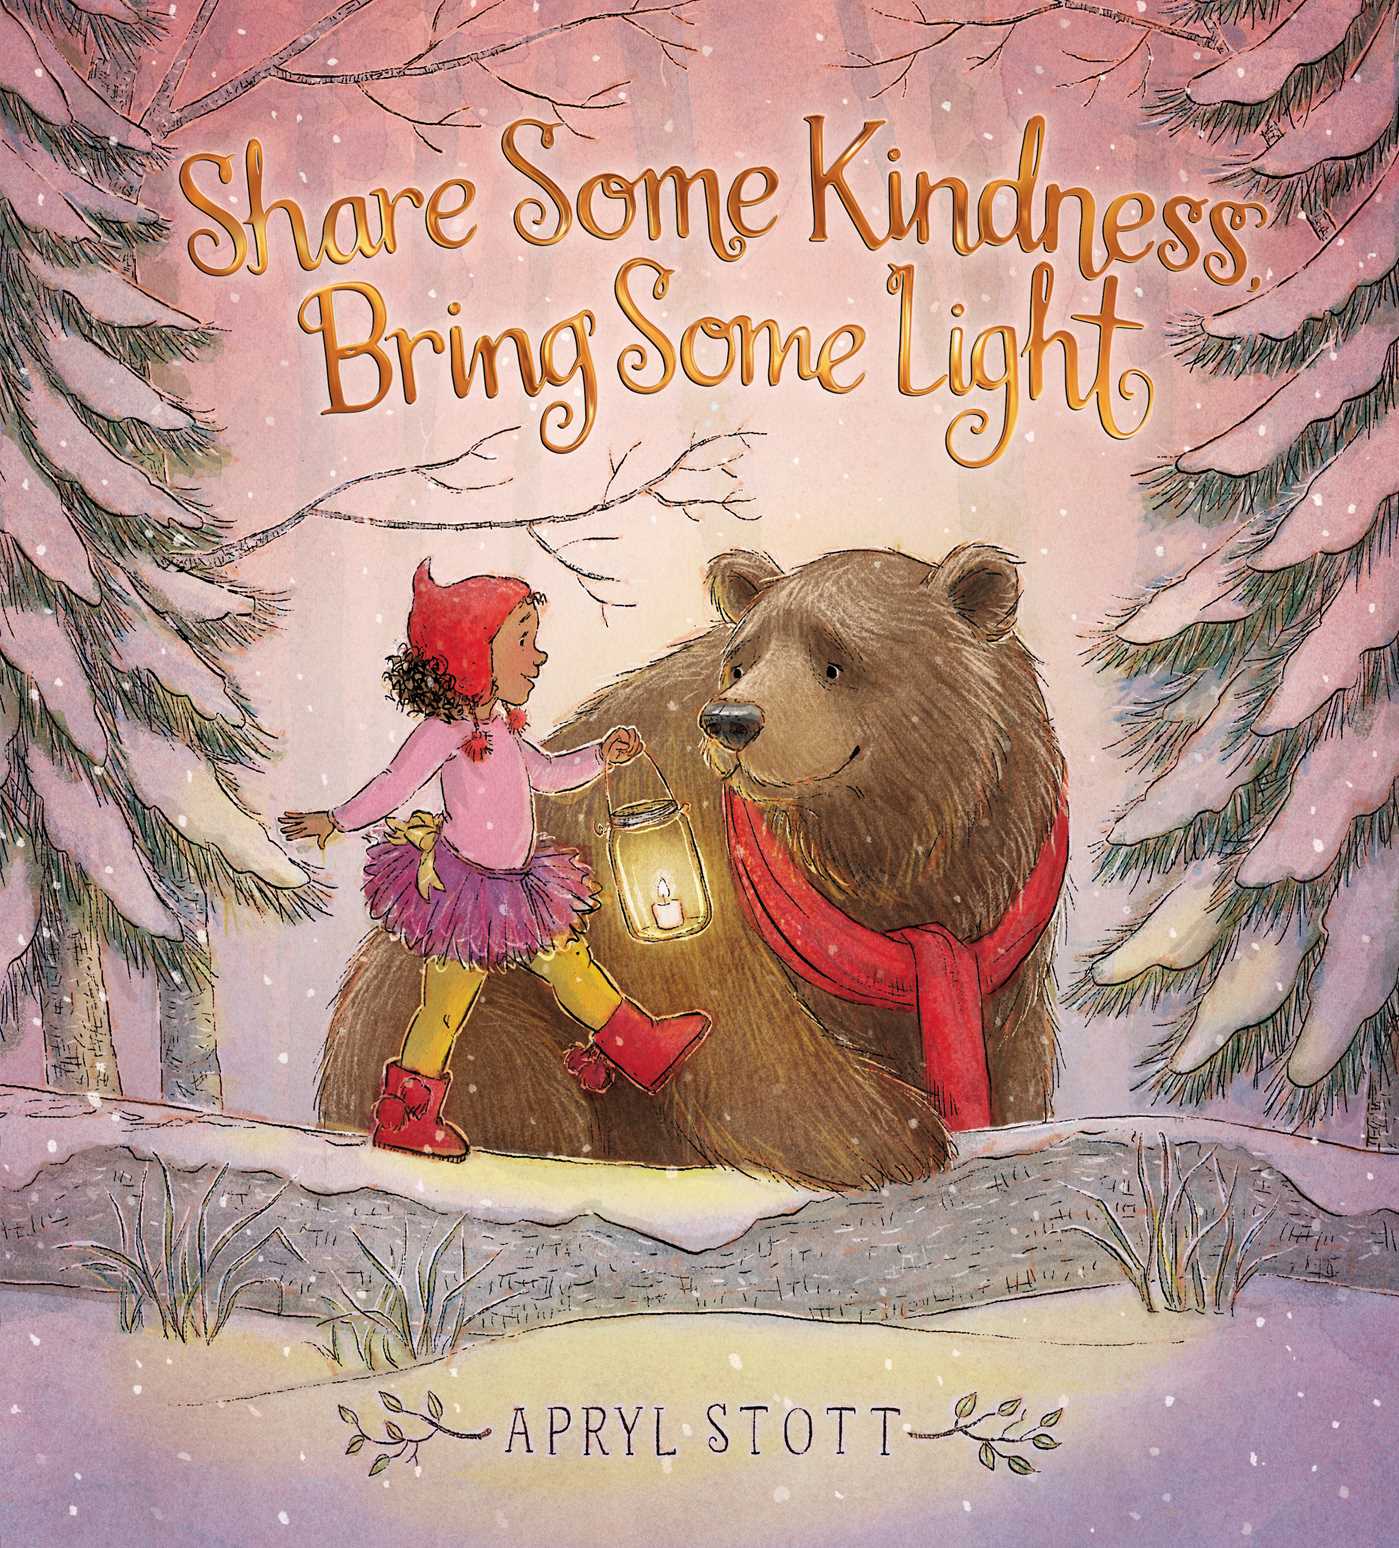 The cover of the picture book "Share Some Kindness, Bring Some Light" features a colorfully dressed little girl and a large brown bear in a red scarf walking happily through the snowy woods.